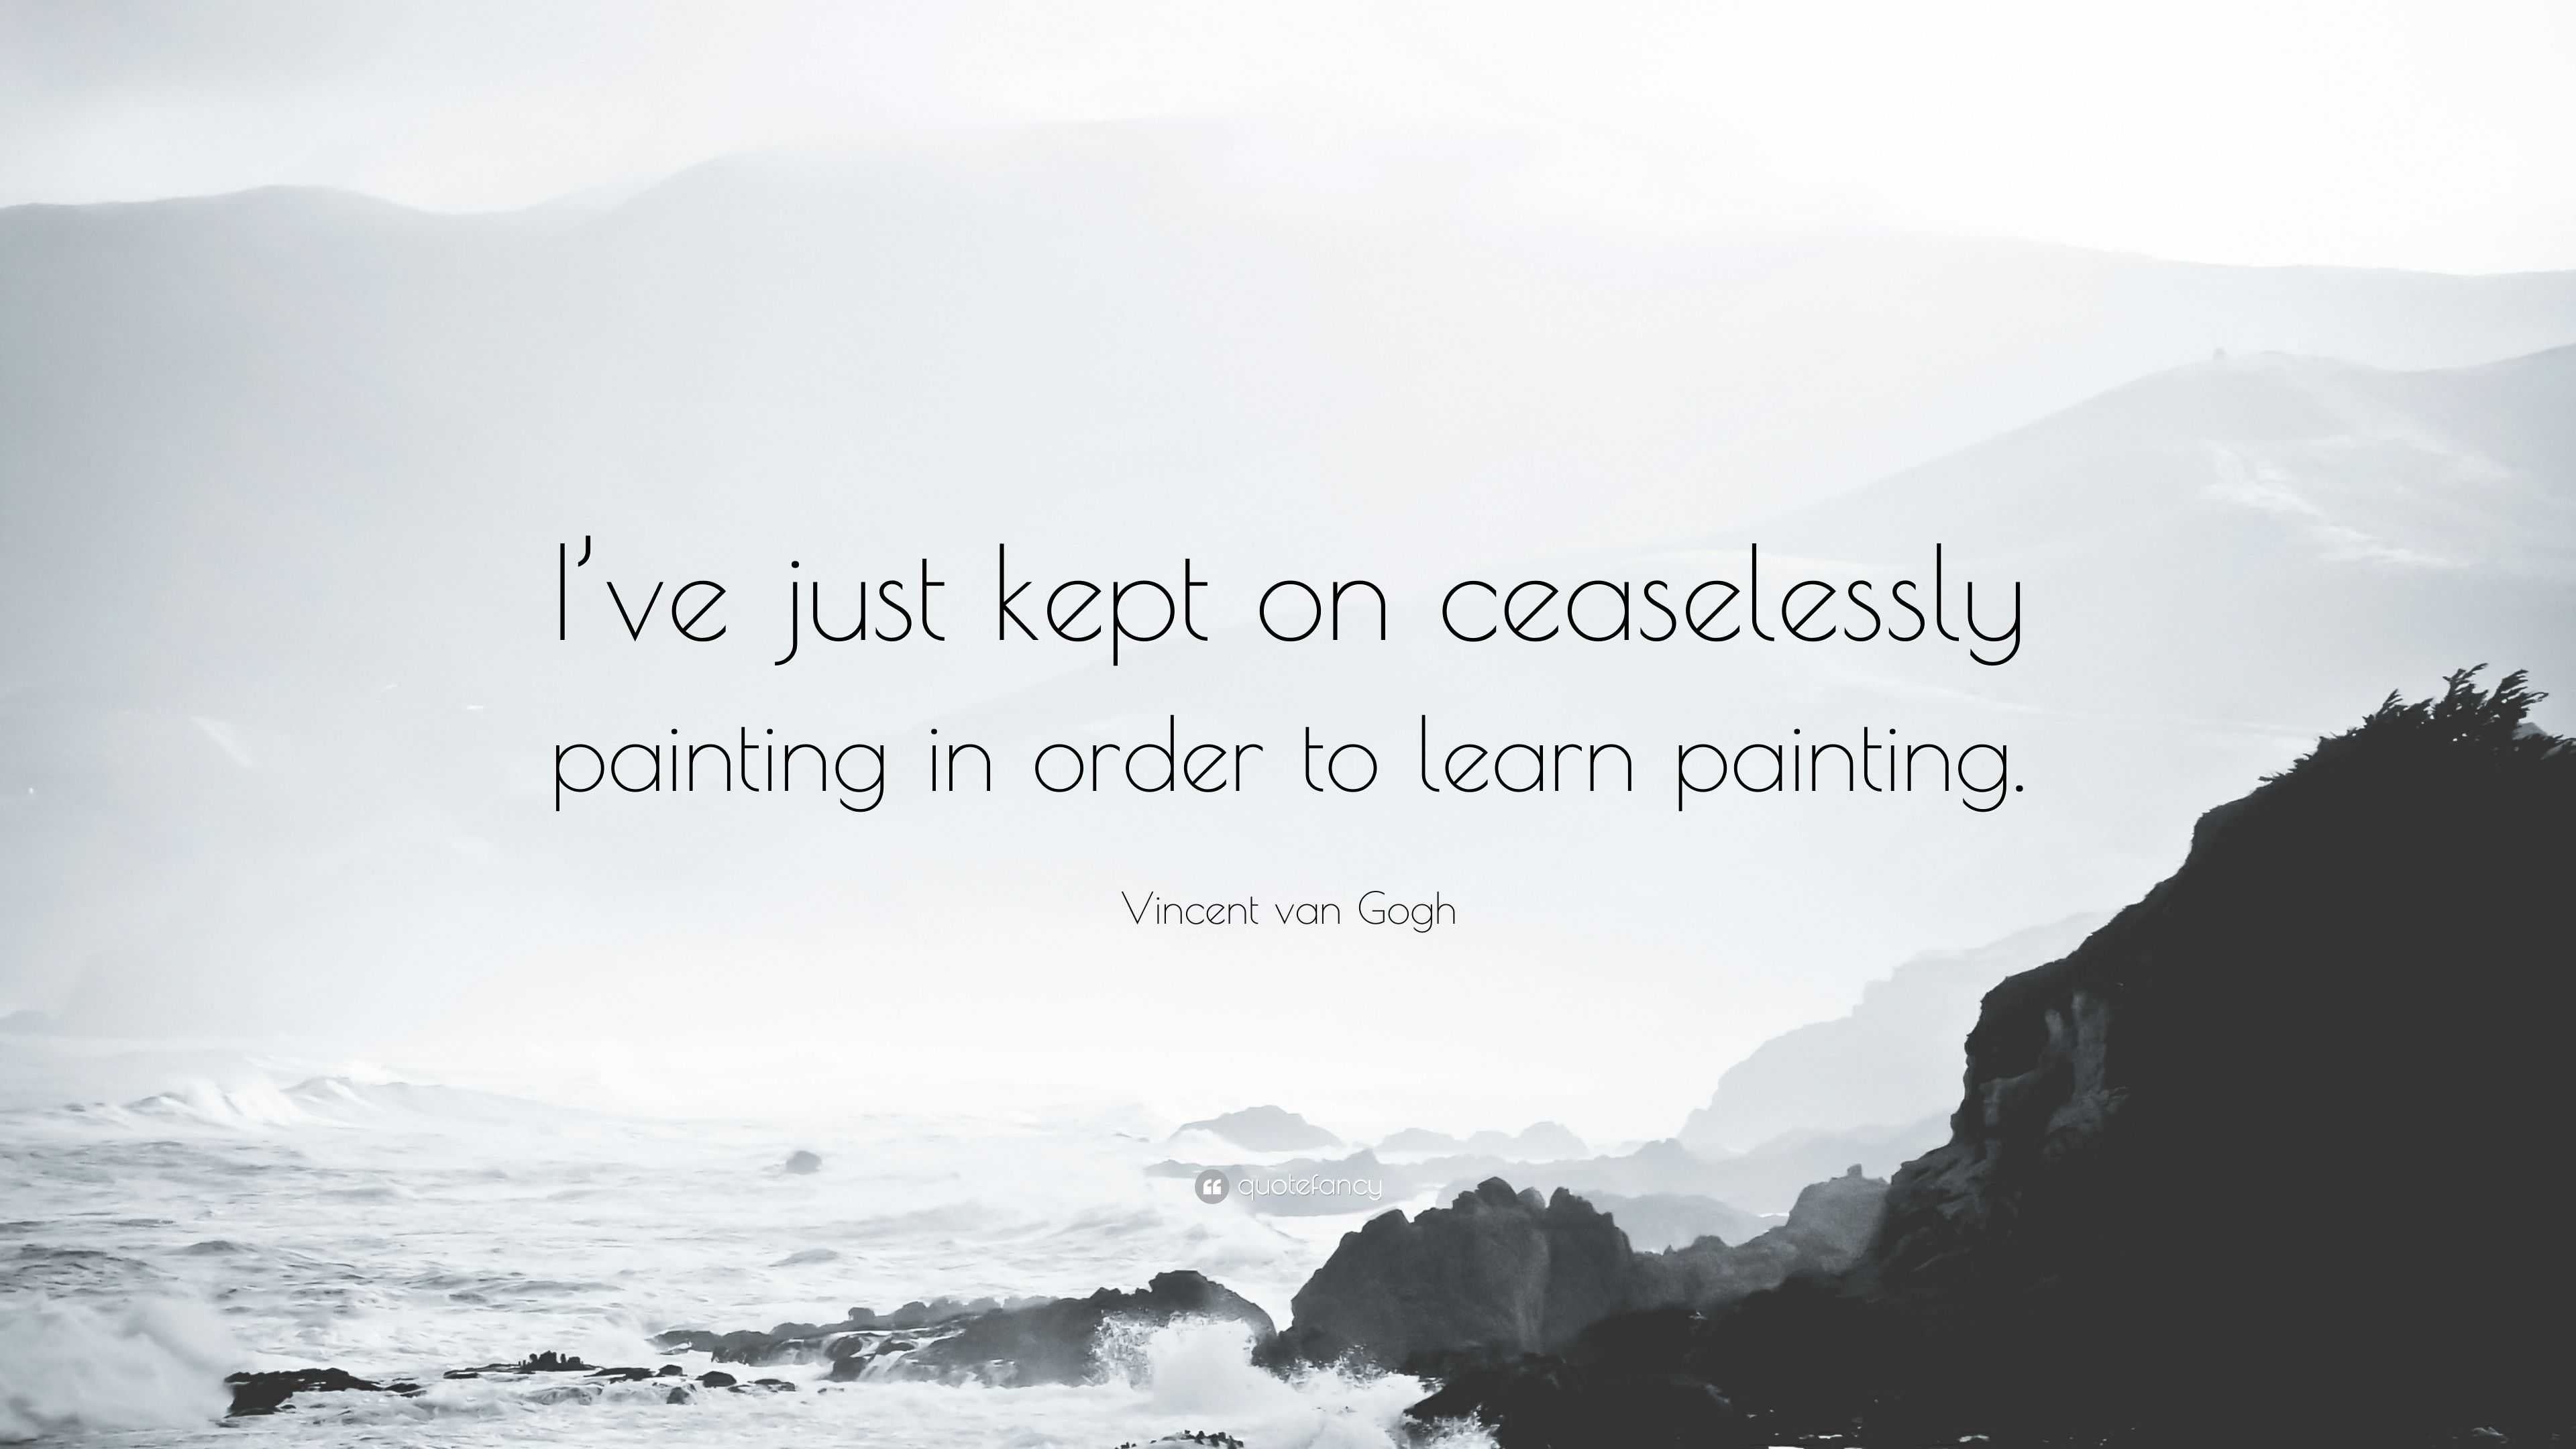 Vincent van Gogh Quote: “I've just kept on ceaselessly painting in order to  learn painting.”